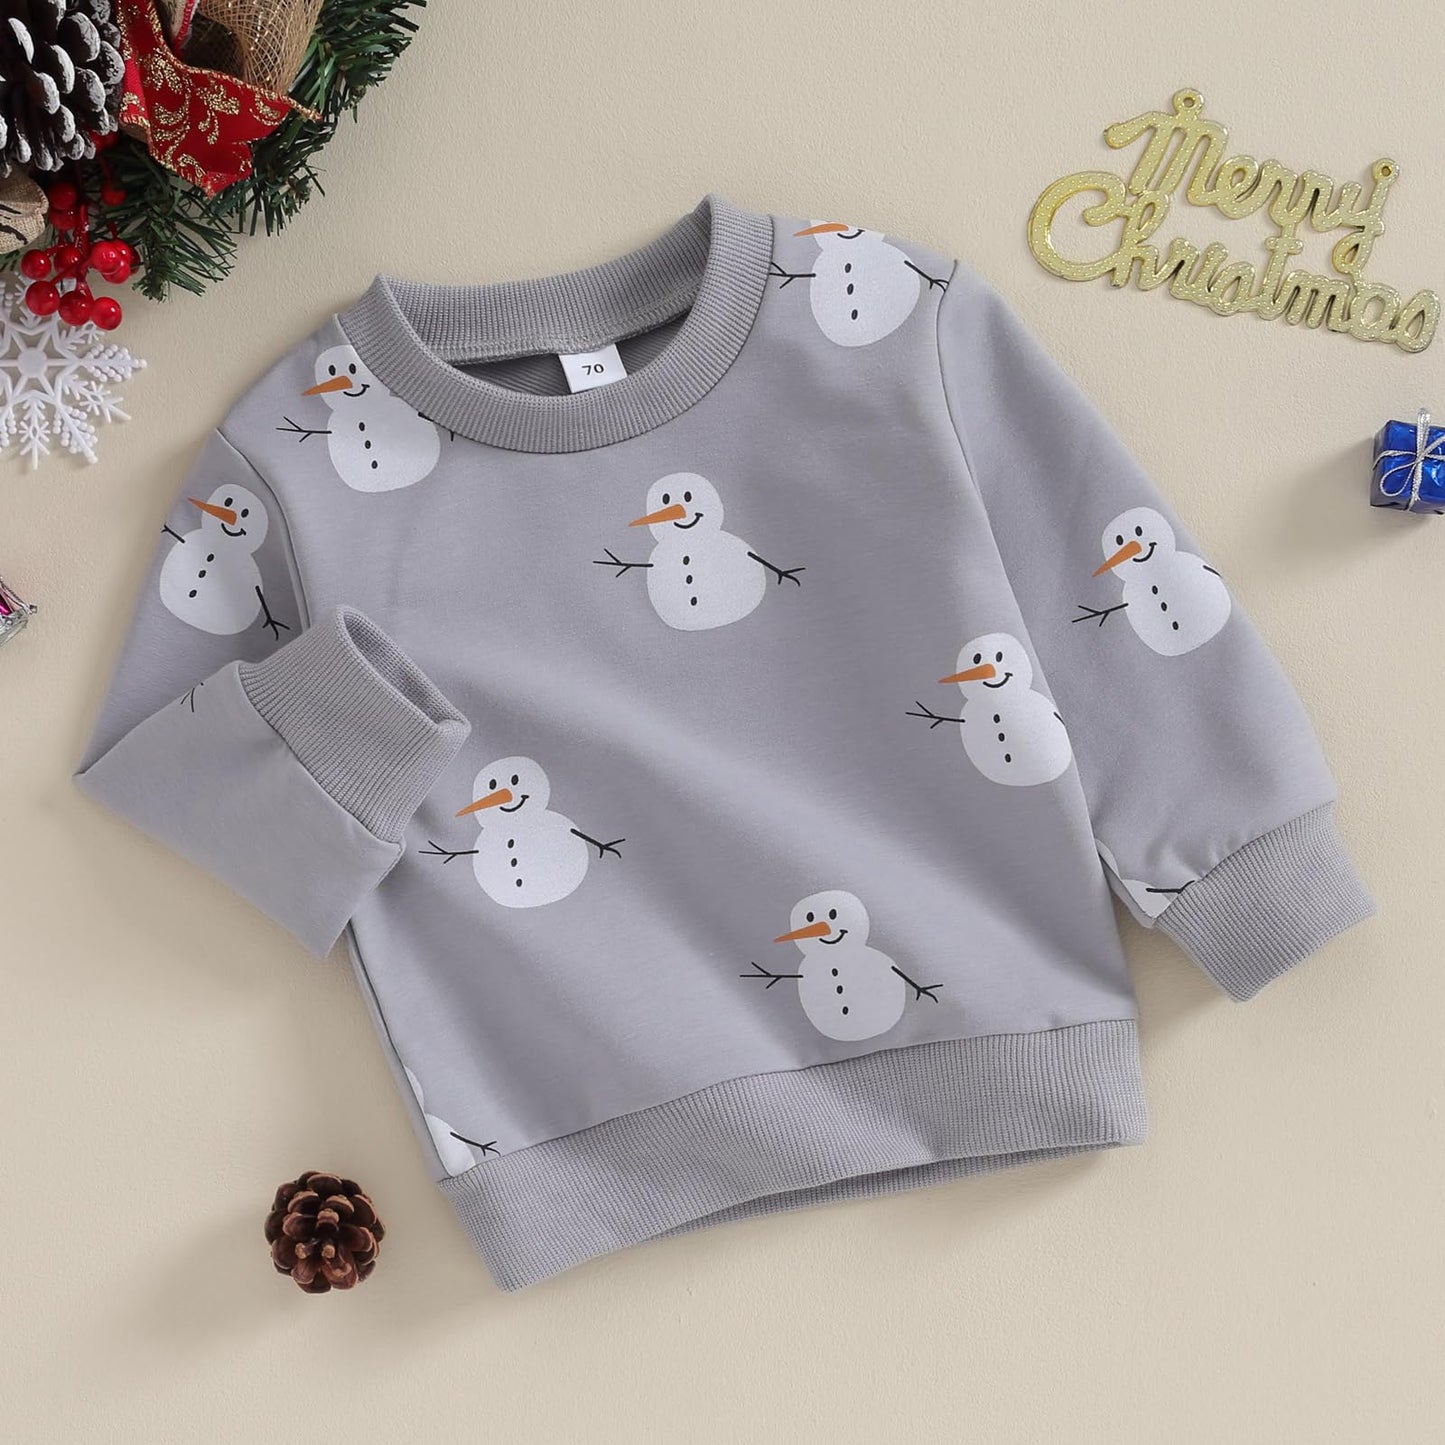 Lucikamy Toddler Baby Boy Girl Christmas Sweatshirt Letter Print Long Sleeve Crewneck Pullover Top Fall Winter Clothes 0-6M